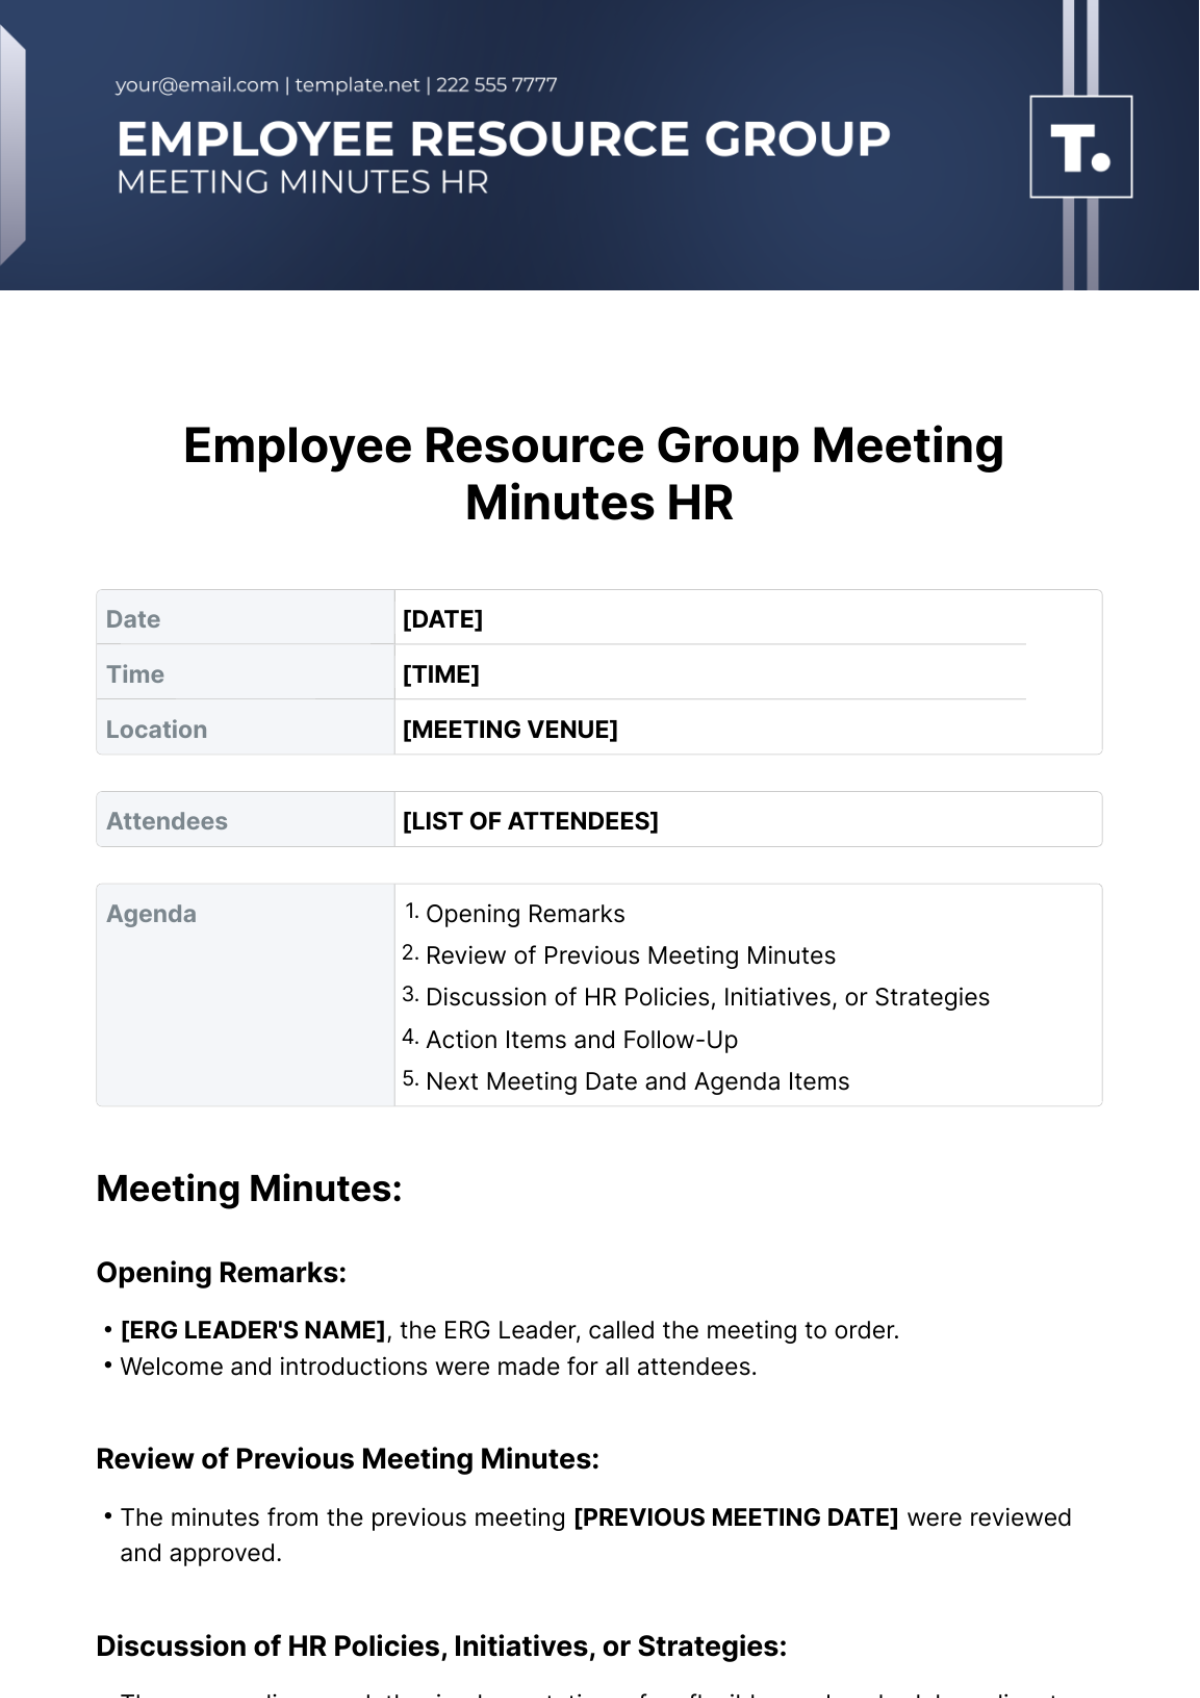 Employee Resource Group Meeting Minutes HR Template